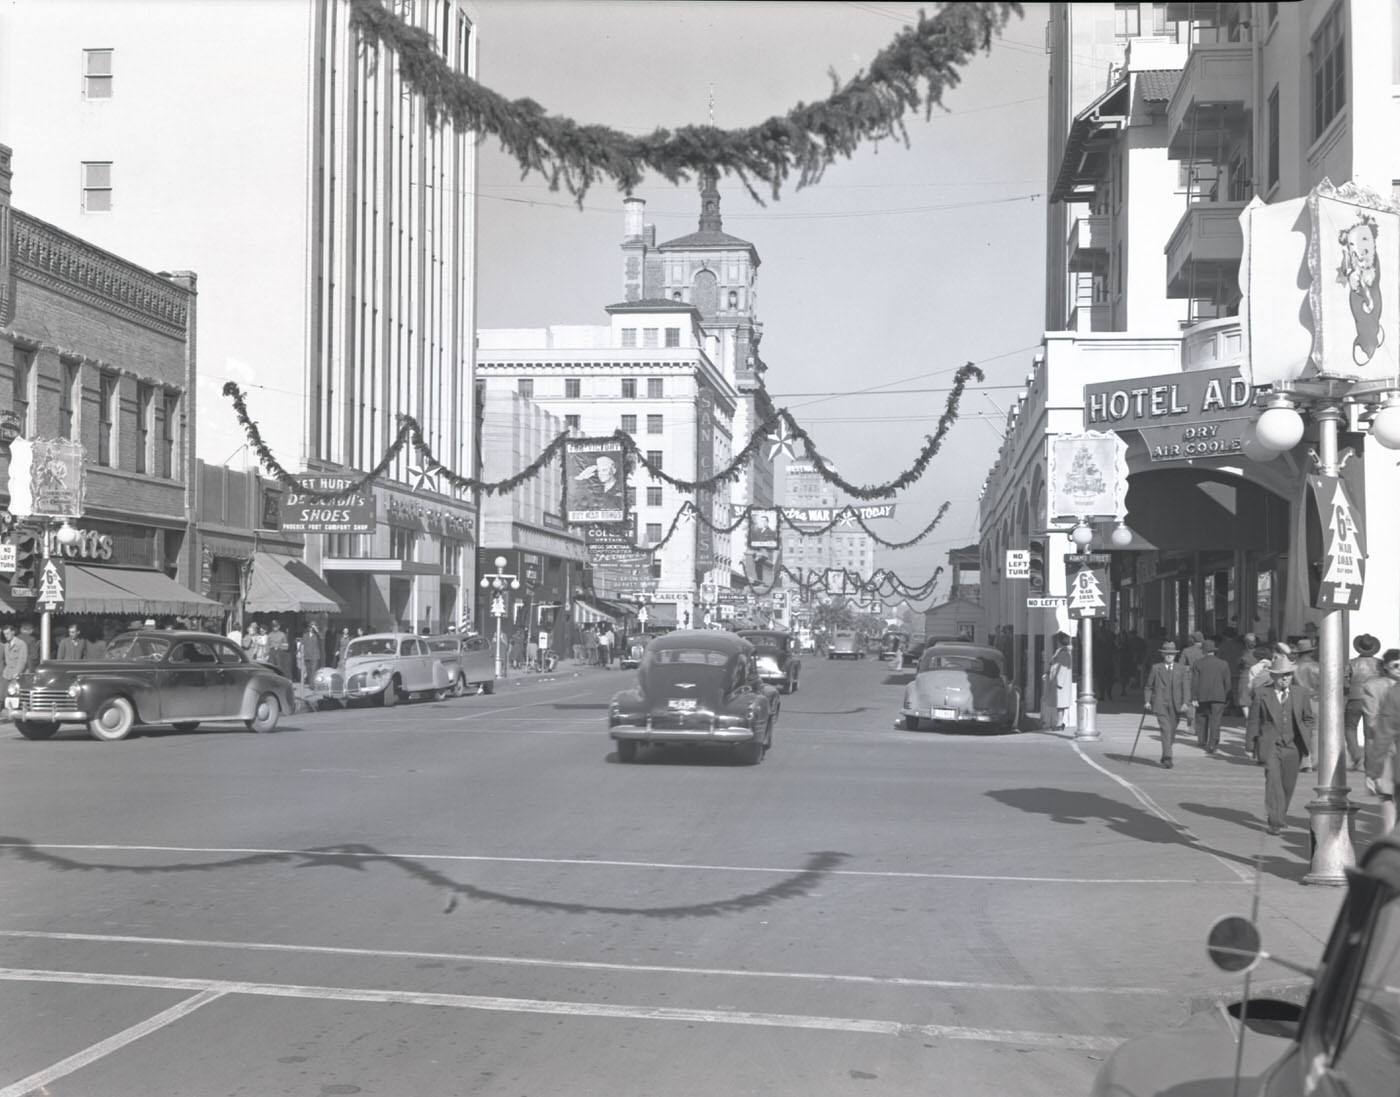 View looking north on Central Ave. from approximately the intersection of Adams and Central. The Hotel Adams and San Carlos Hotel are visible, 1944